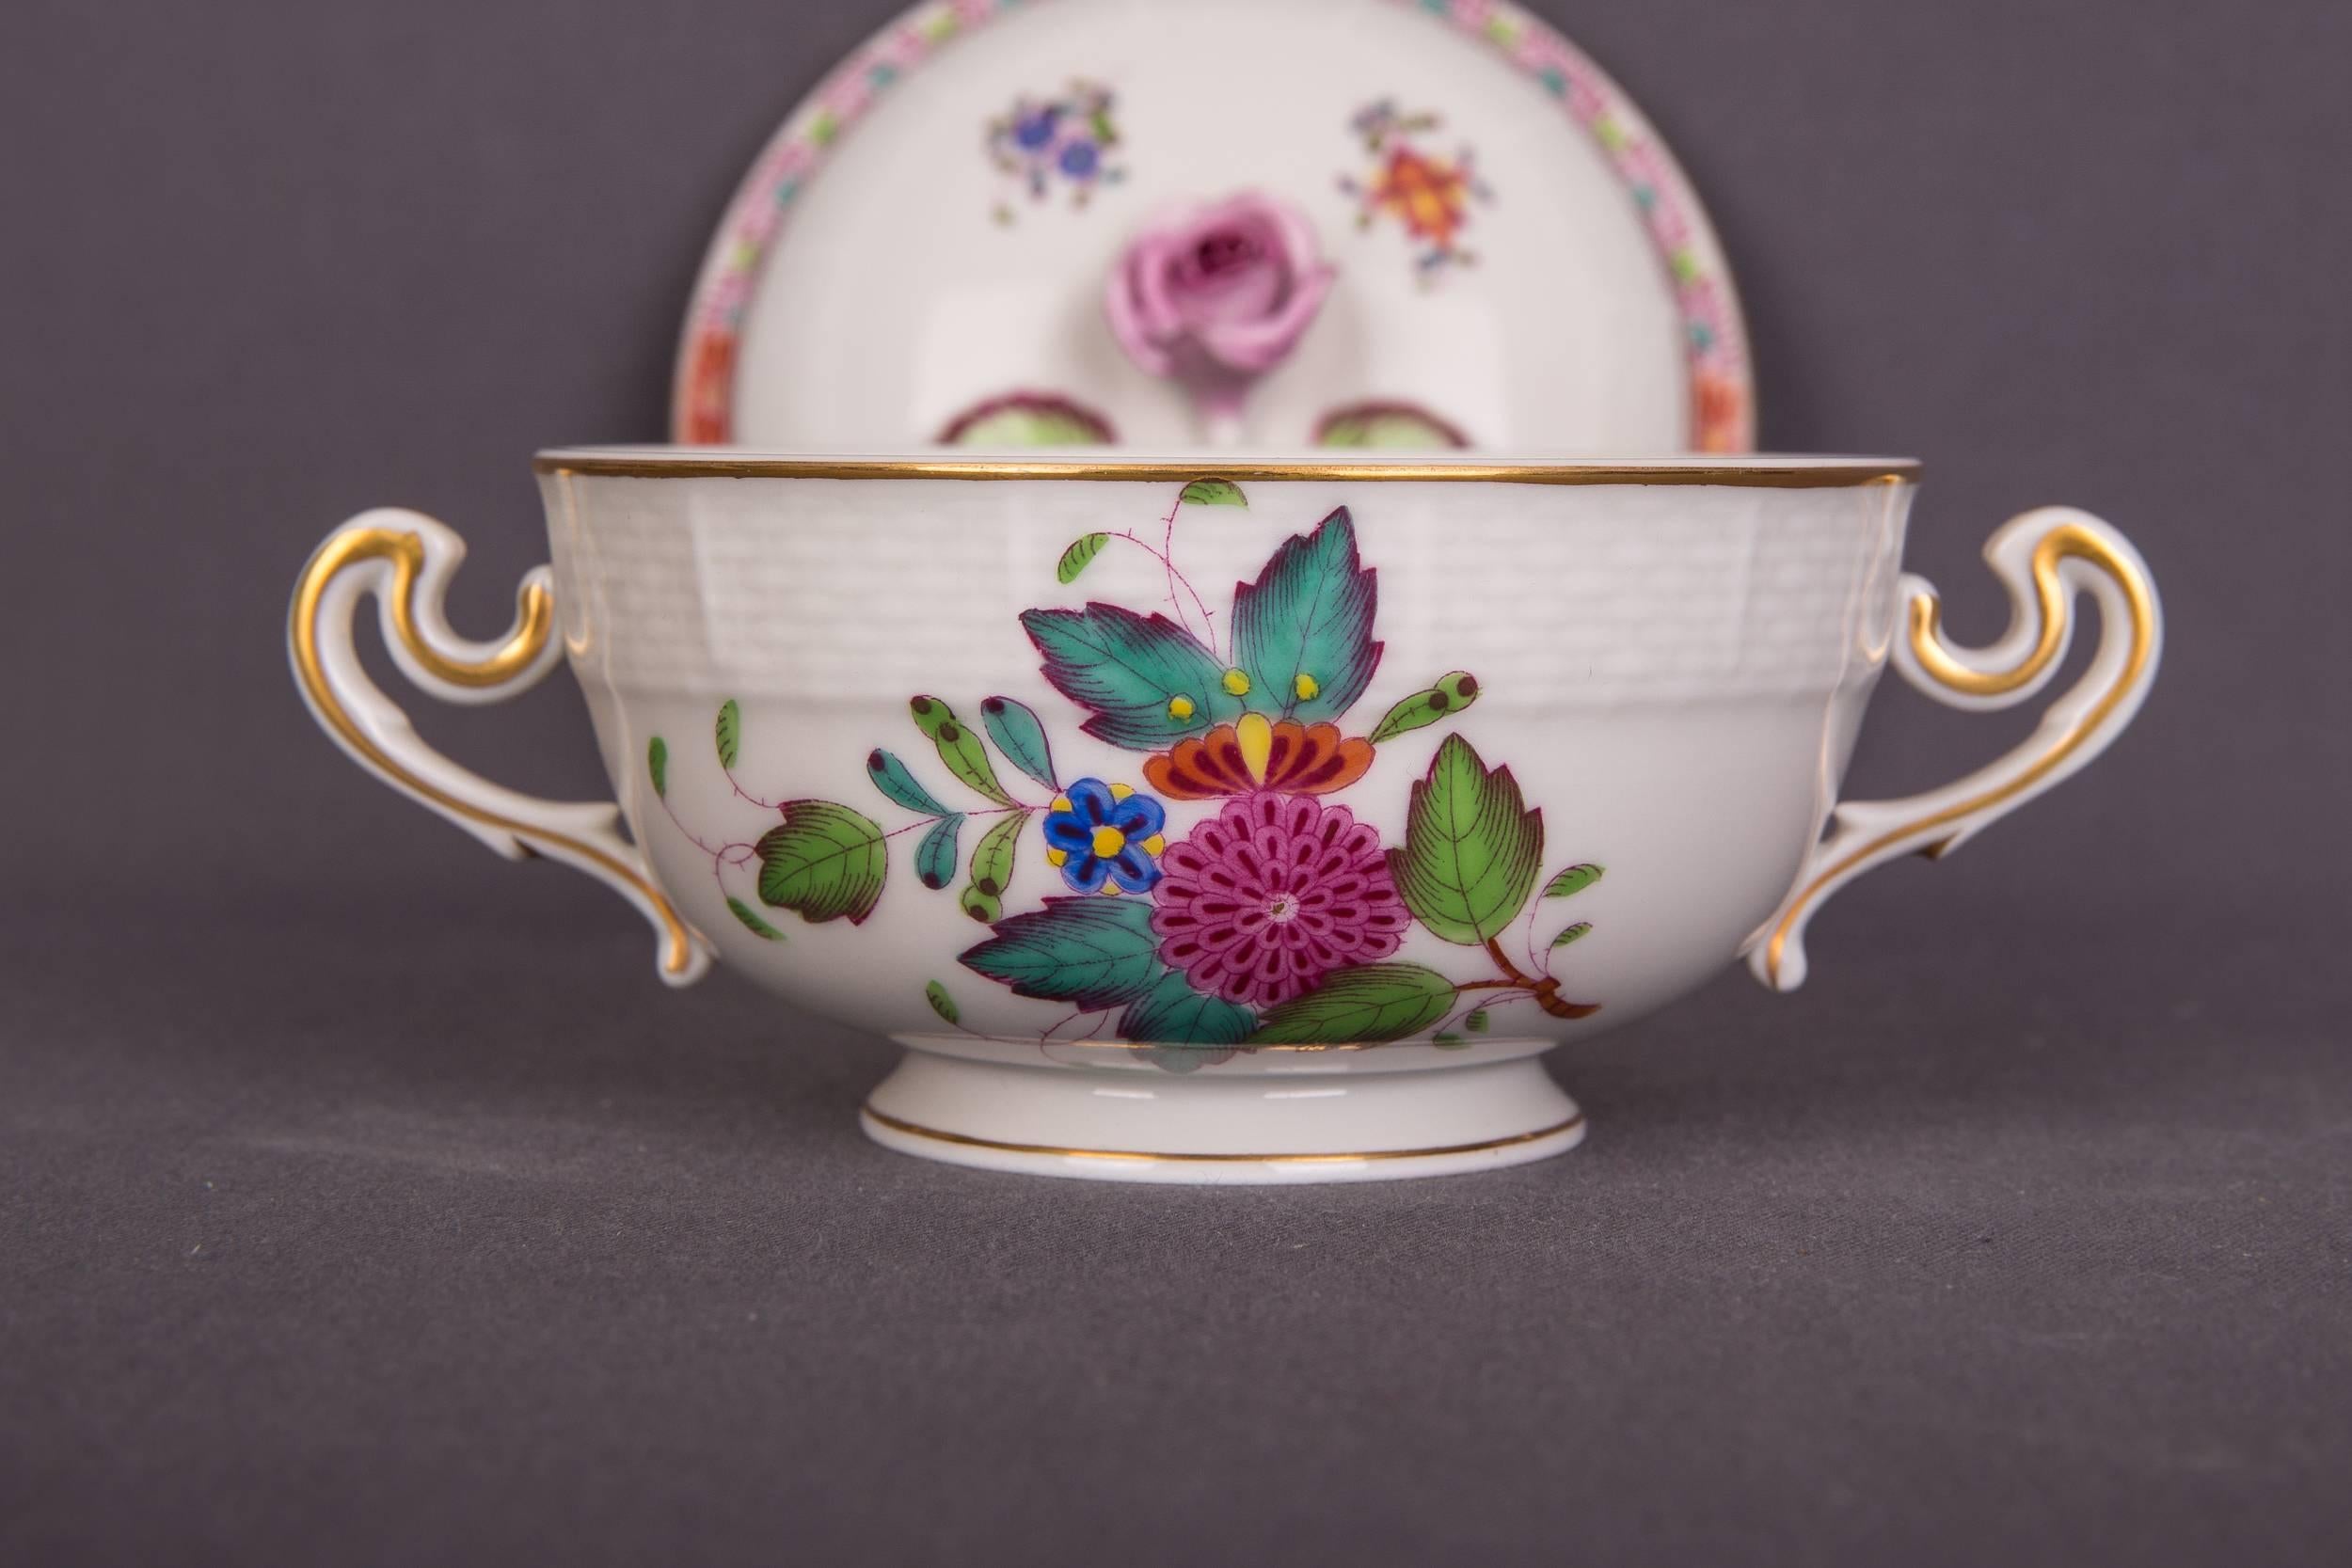 20th Century Extensive Rare Herend Dining Service Porcelain with a Lot of Flowers and Gold For Sale